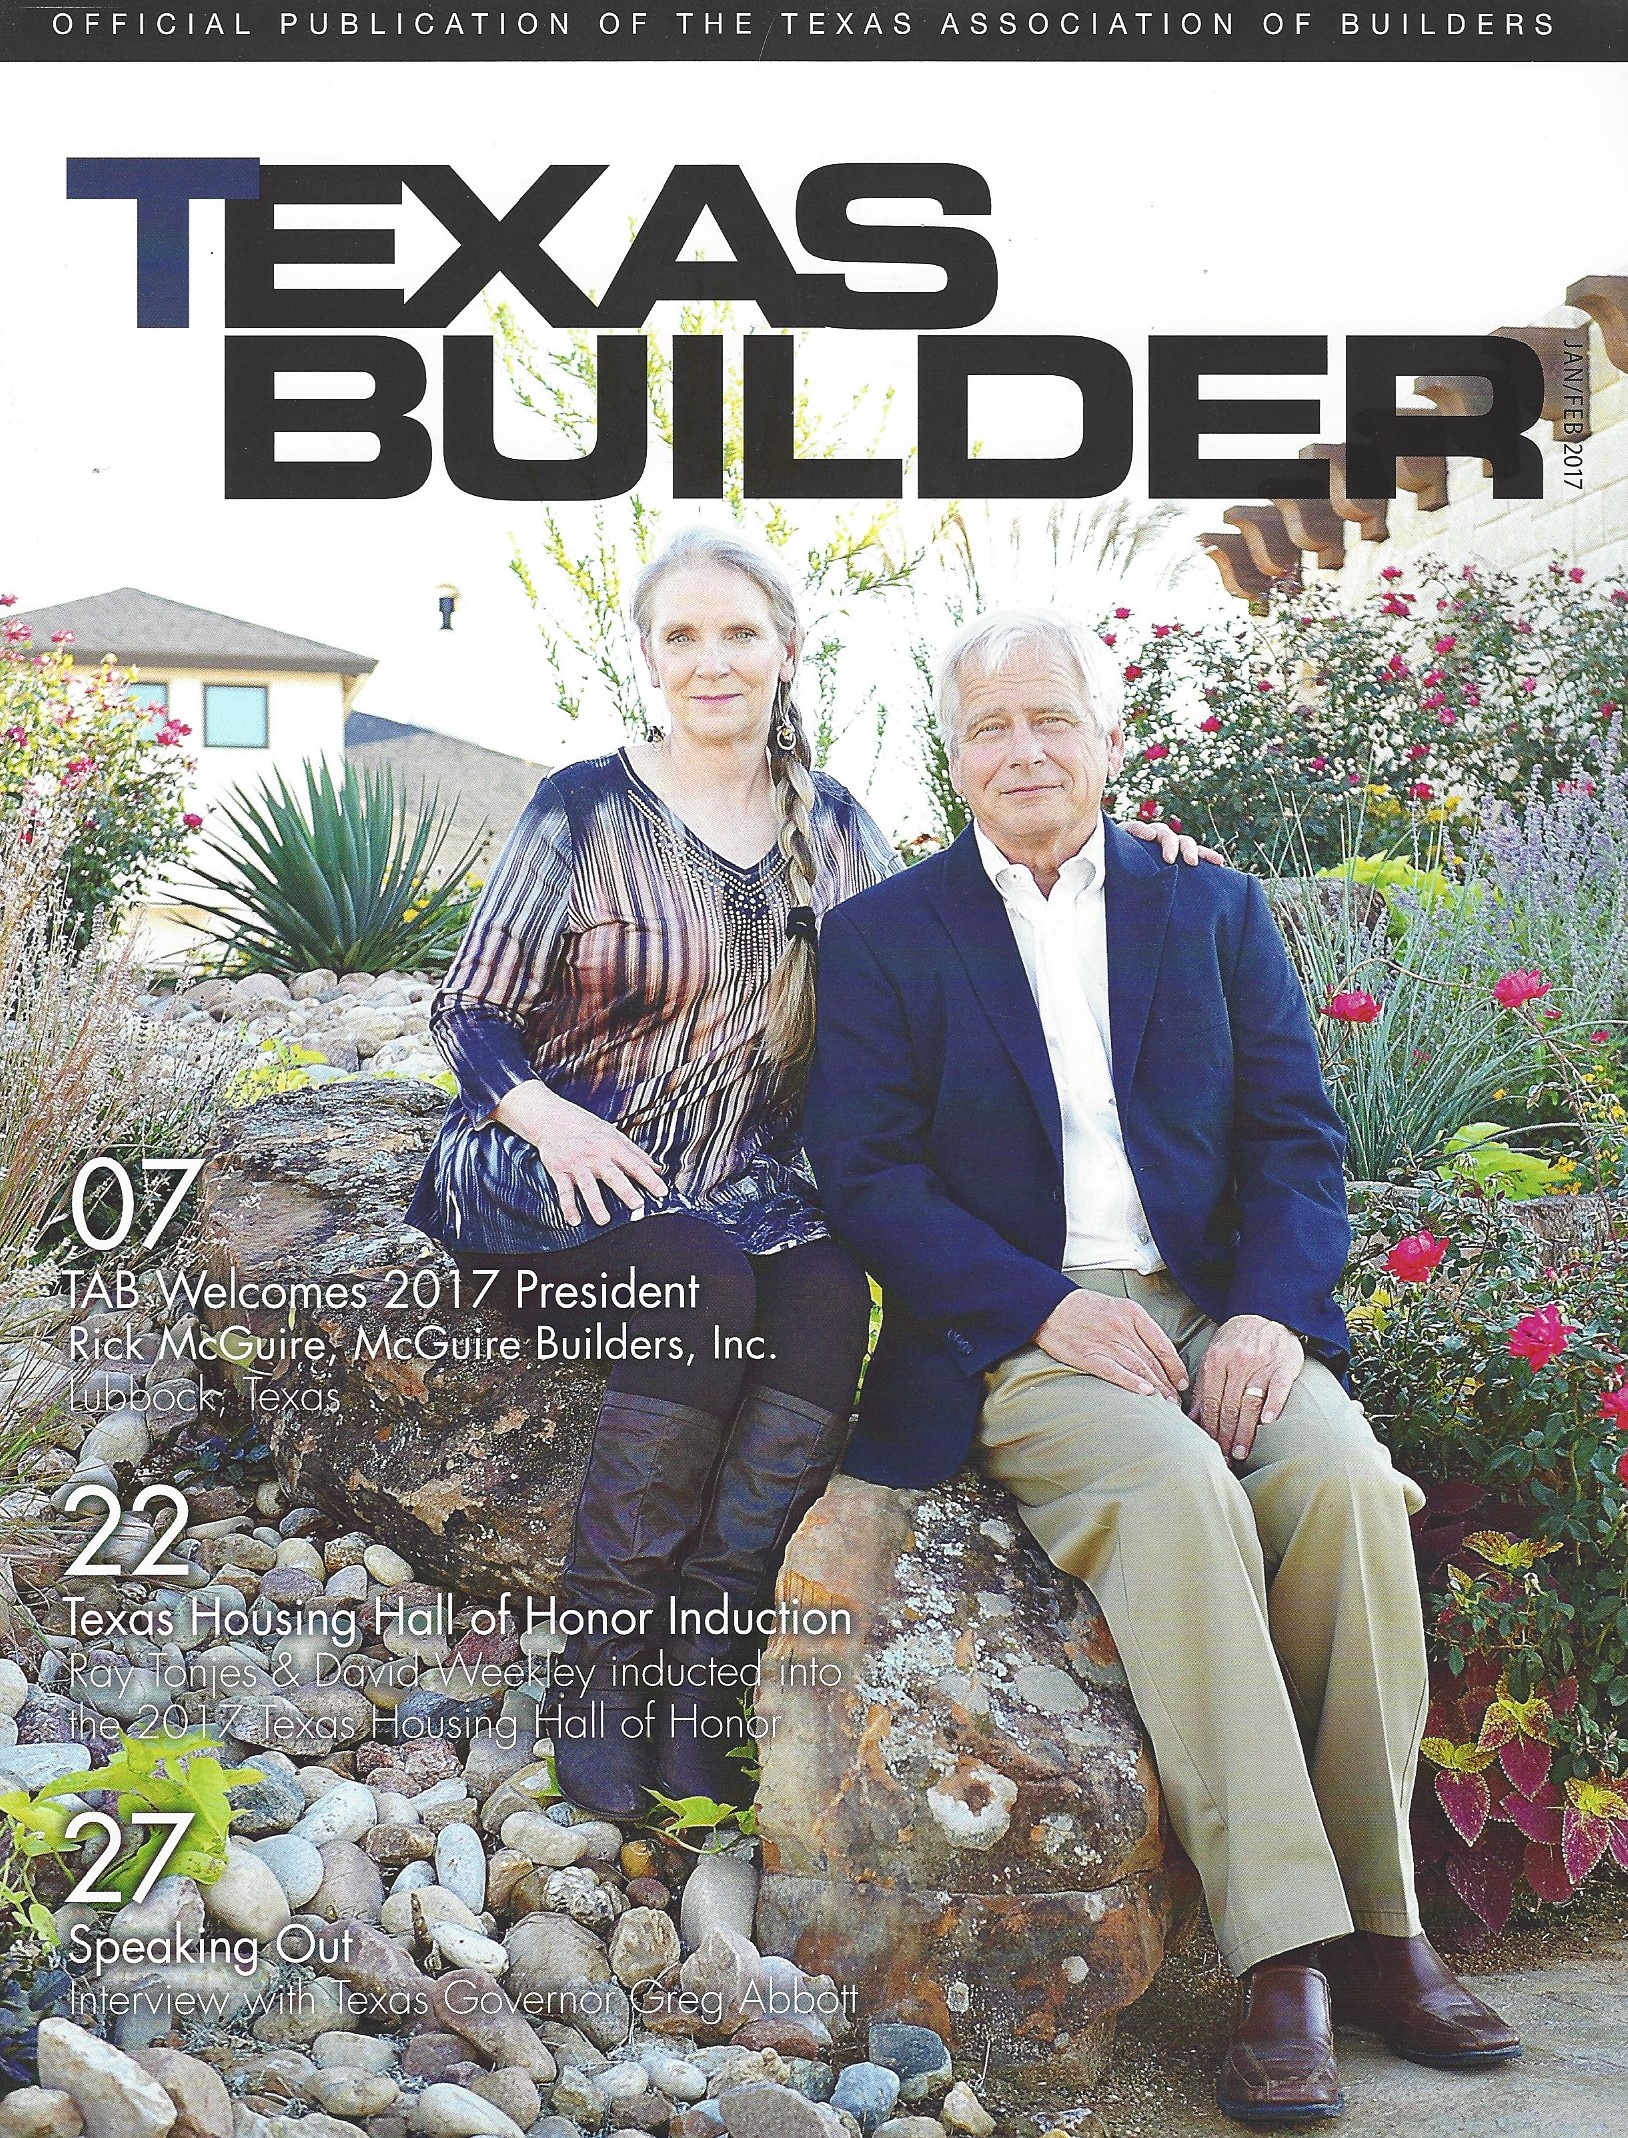 Texas Builder Magazine Welcomes Rick as the 2017 TAB President